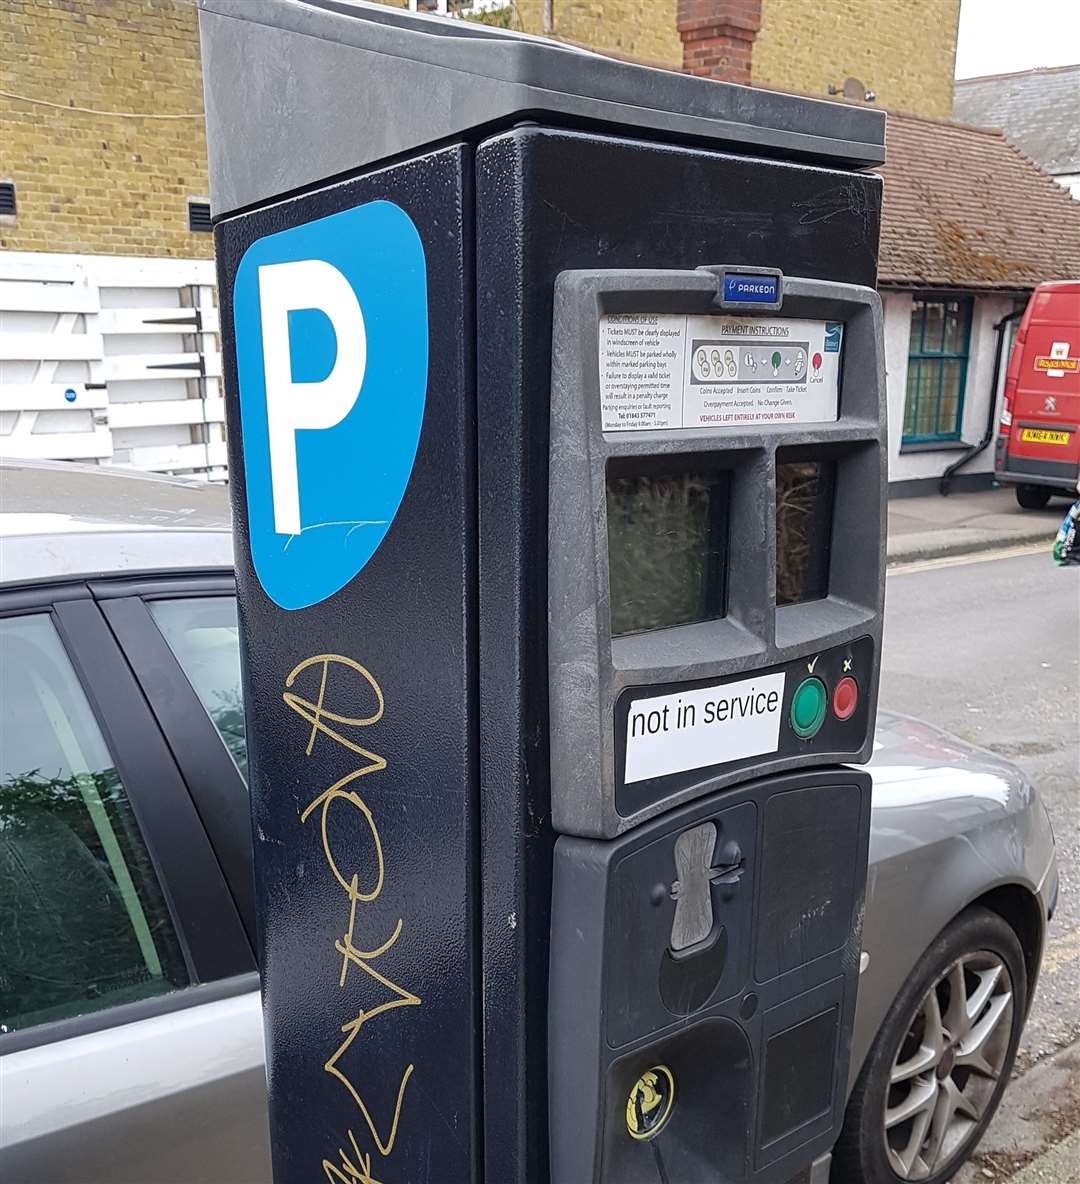 One of the parking meters installed in the side roads in Birchington